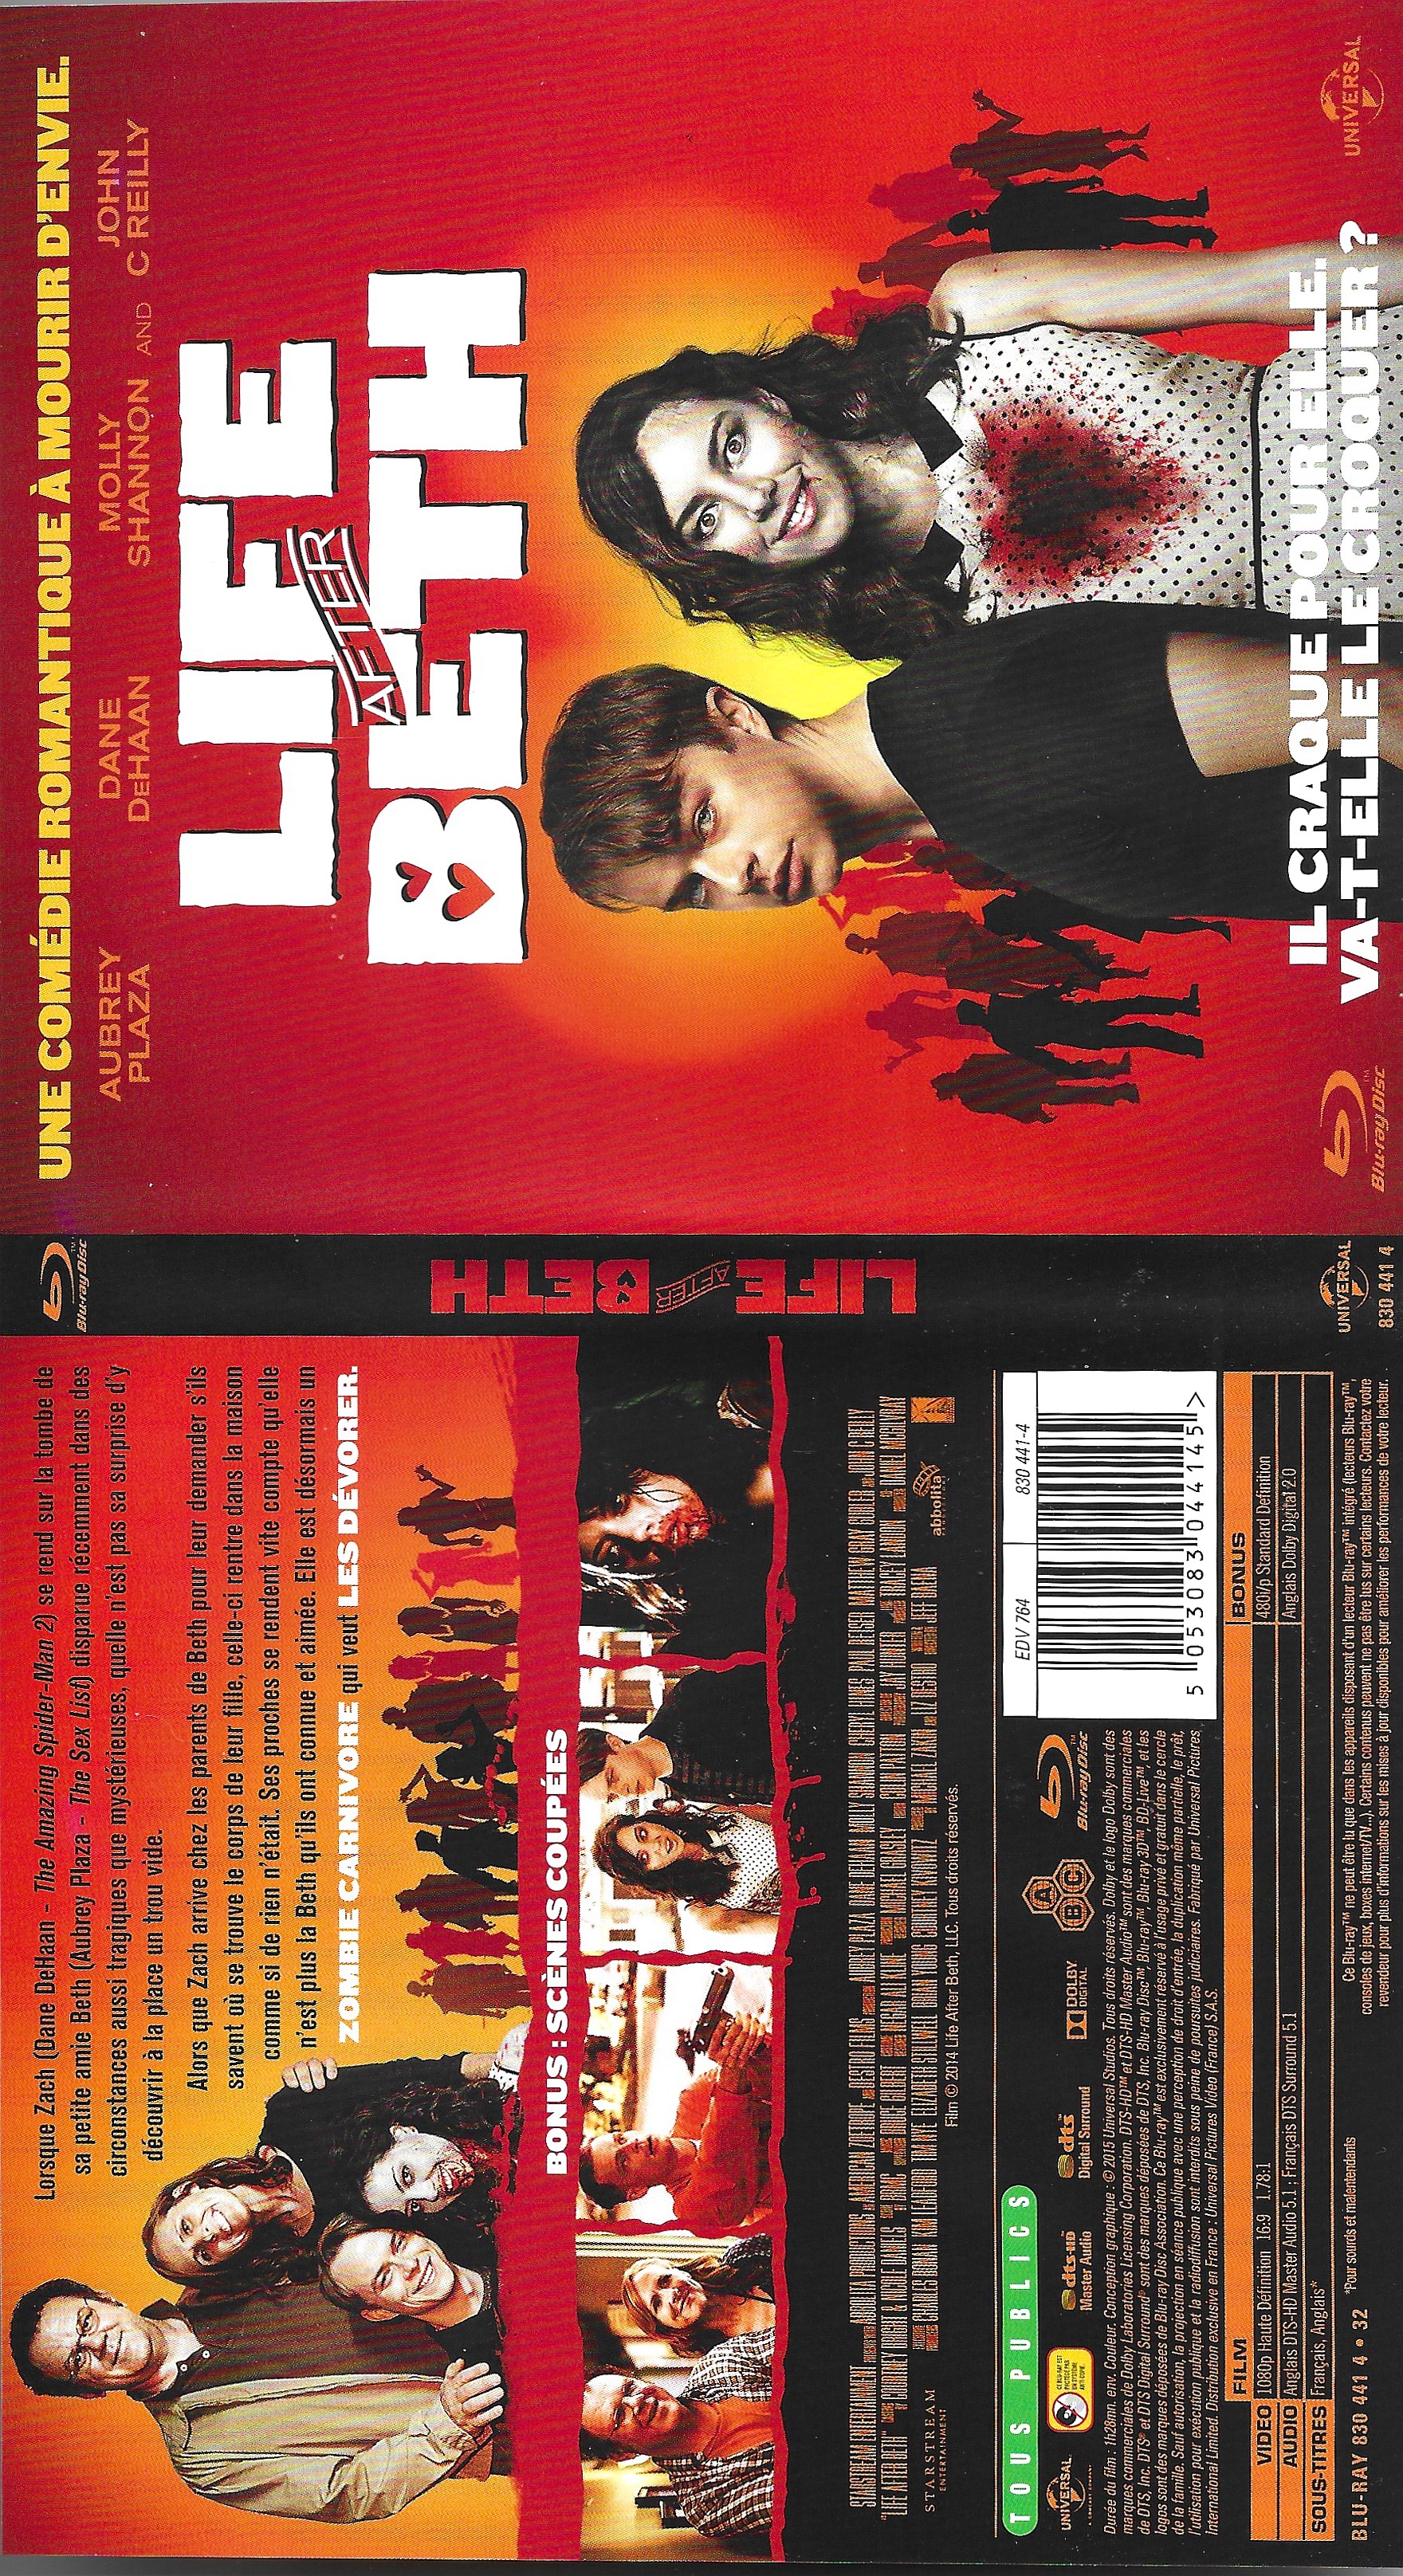 Jaquette DVD Life after Beth (BLU-RAY)